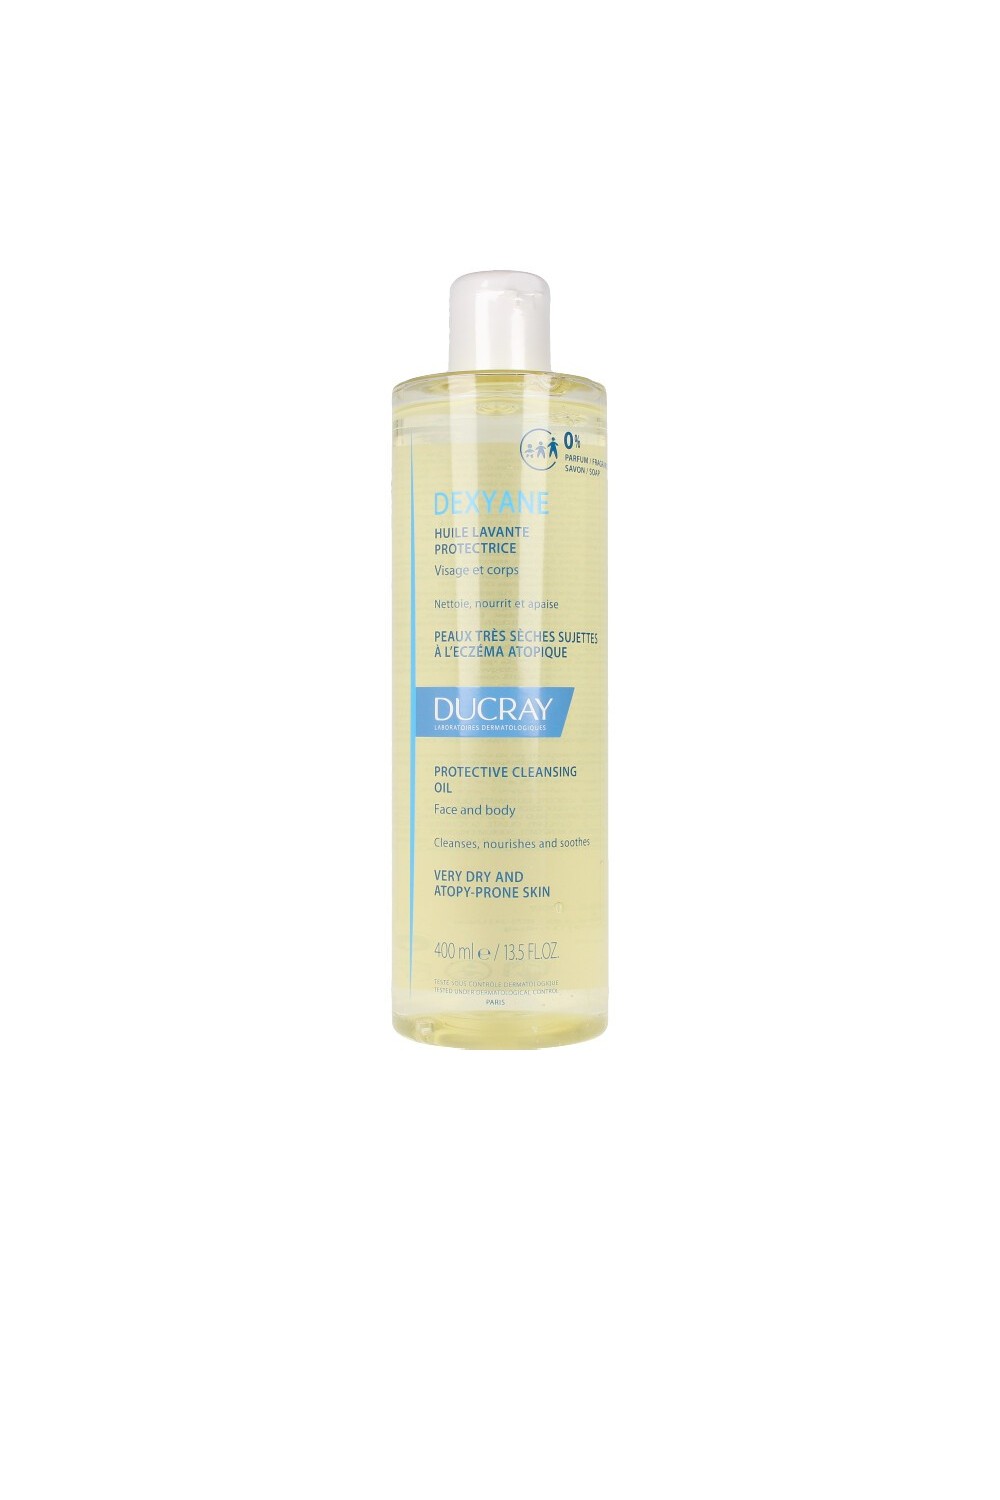 DUCRAY - Dexyane Protective Cleansing Oil 400ml